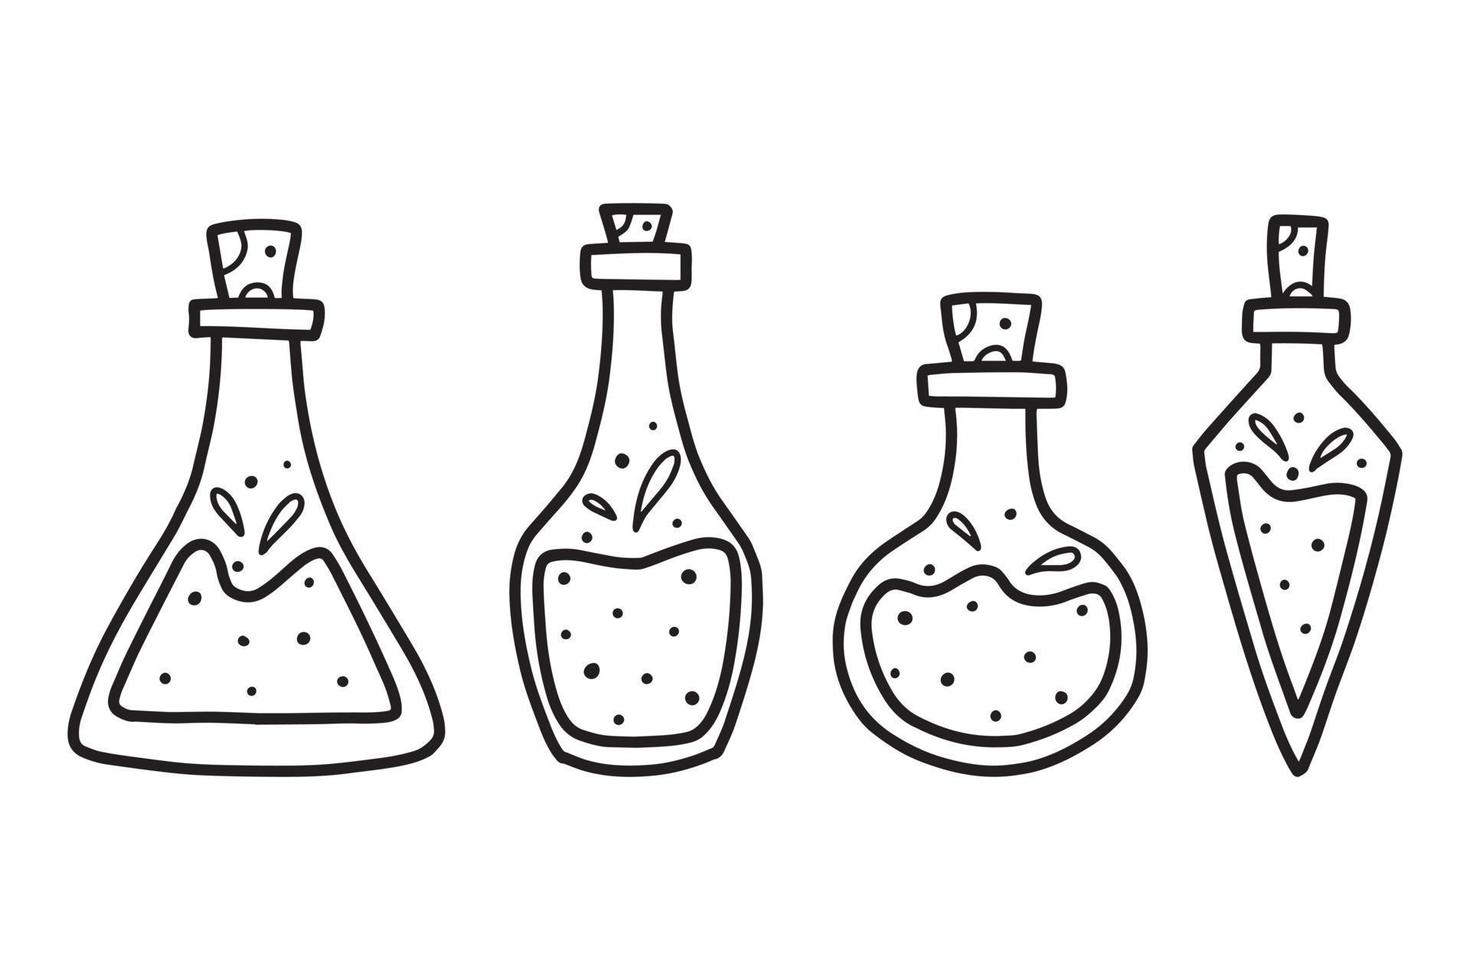 A set of potion jars. Magic Poison. Vector illustration. Collection of flasks with poison. Doodle style.